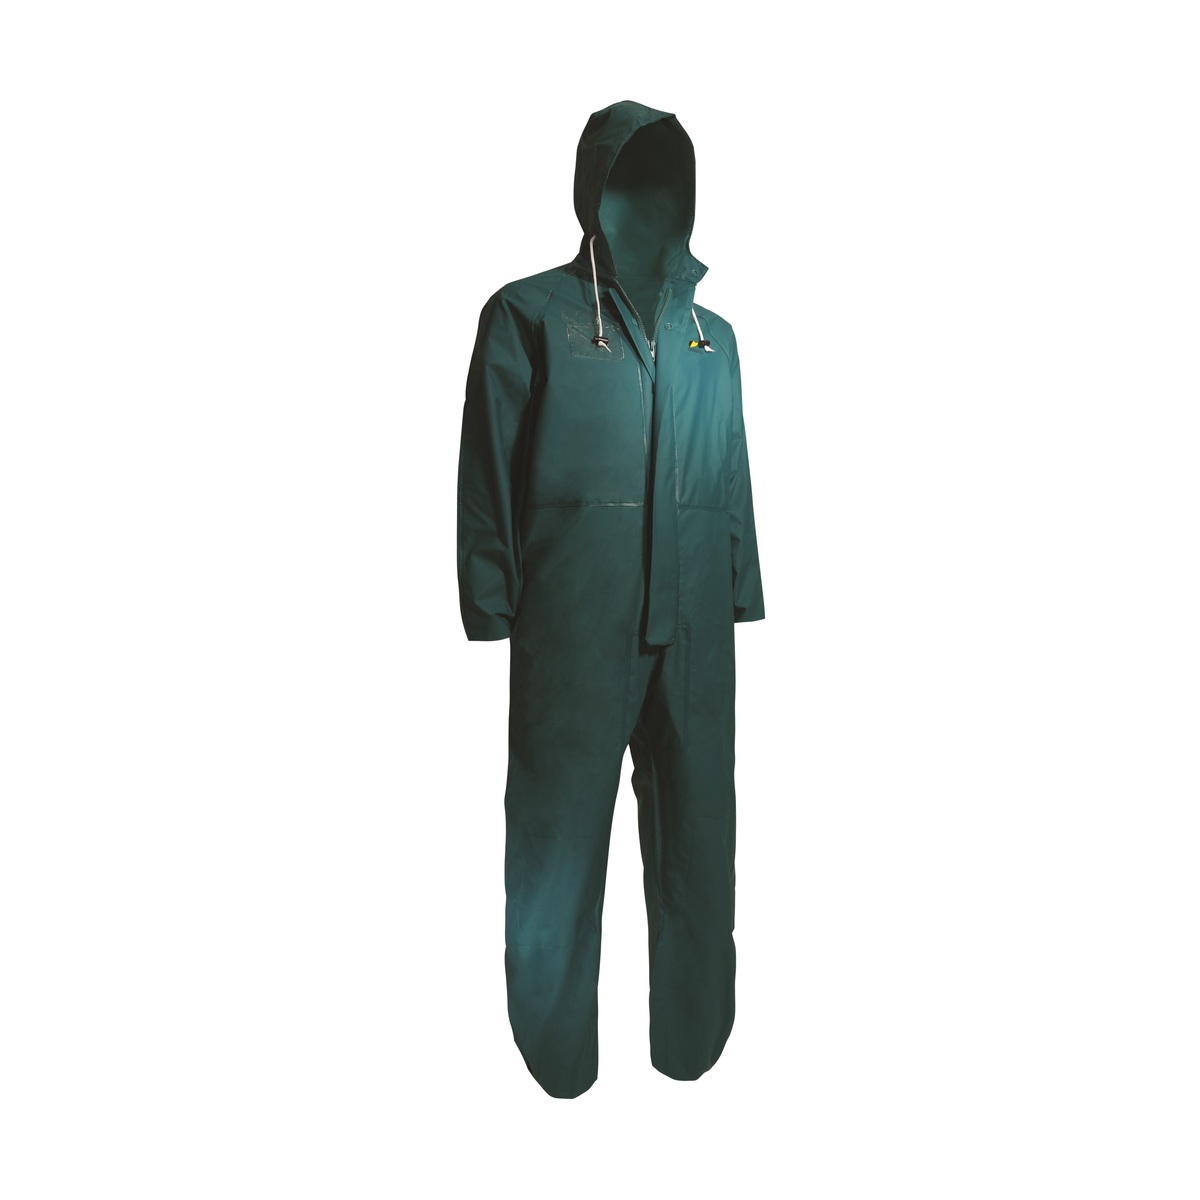 Dunlop® Protective Footwear Small Green Sanitex .35 mm Nylon/Polyester/PVC Coveralls